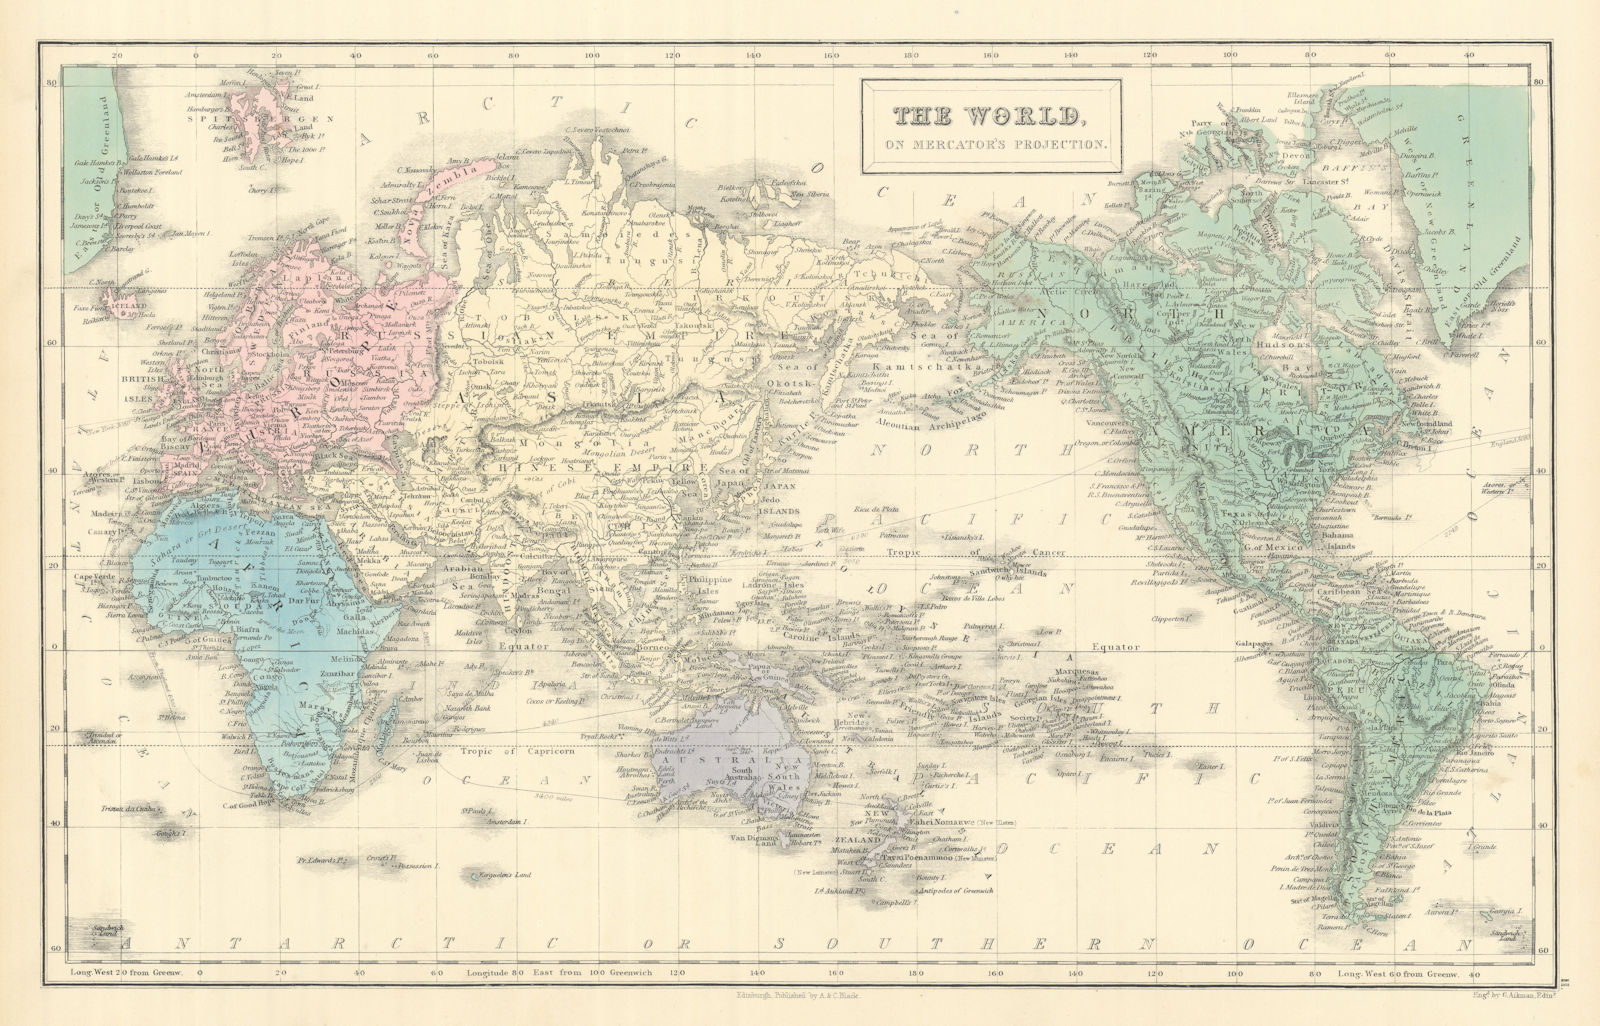 The World, on Mercator's projection by GEORGE AIKMAN. Asia-centric 1854 map